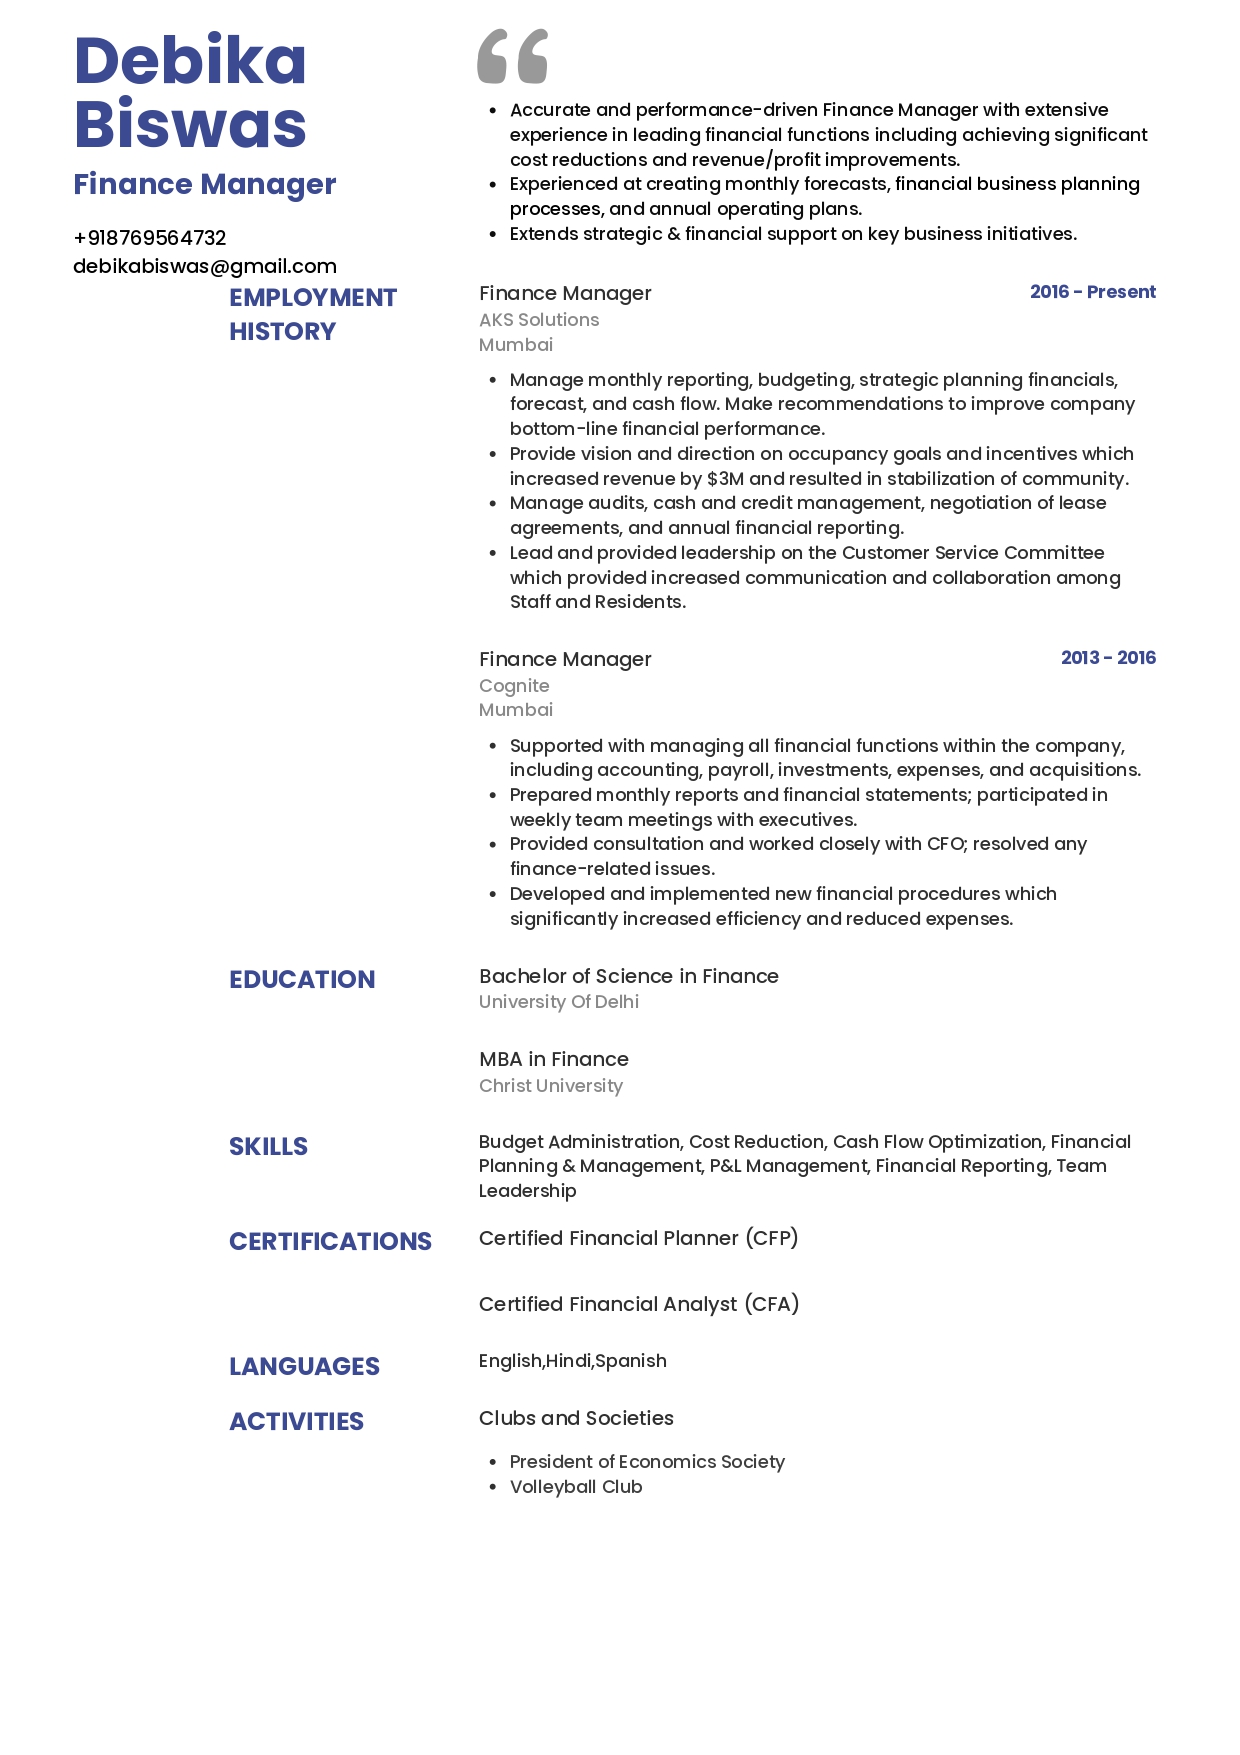 Resume of Finance Manager